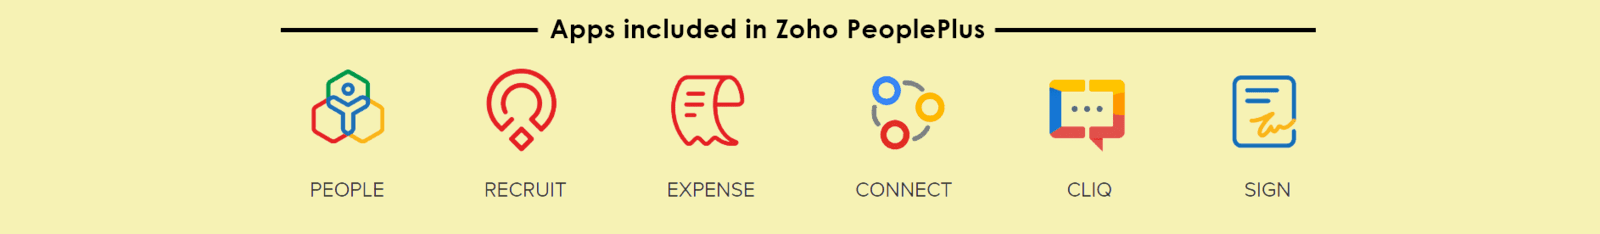 Apps included in Zoho People Plus